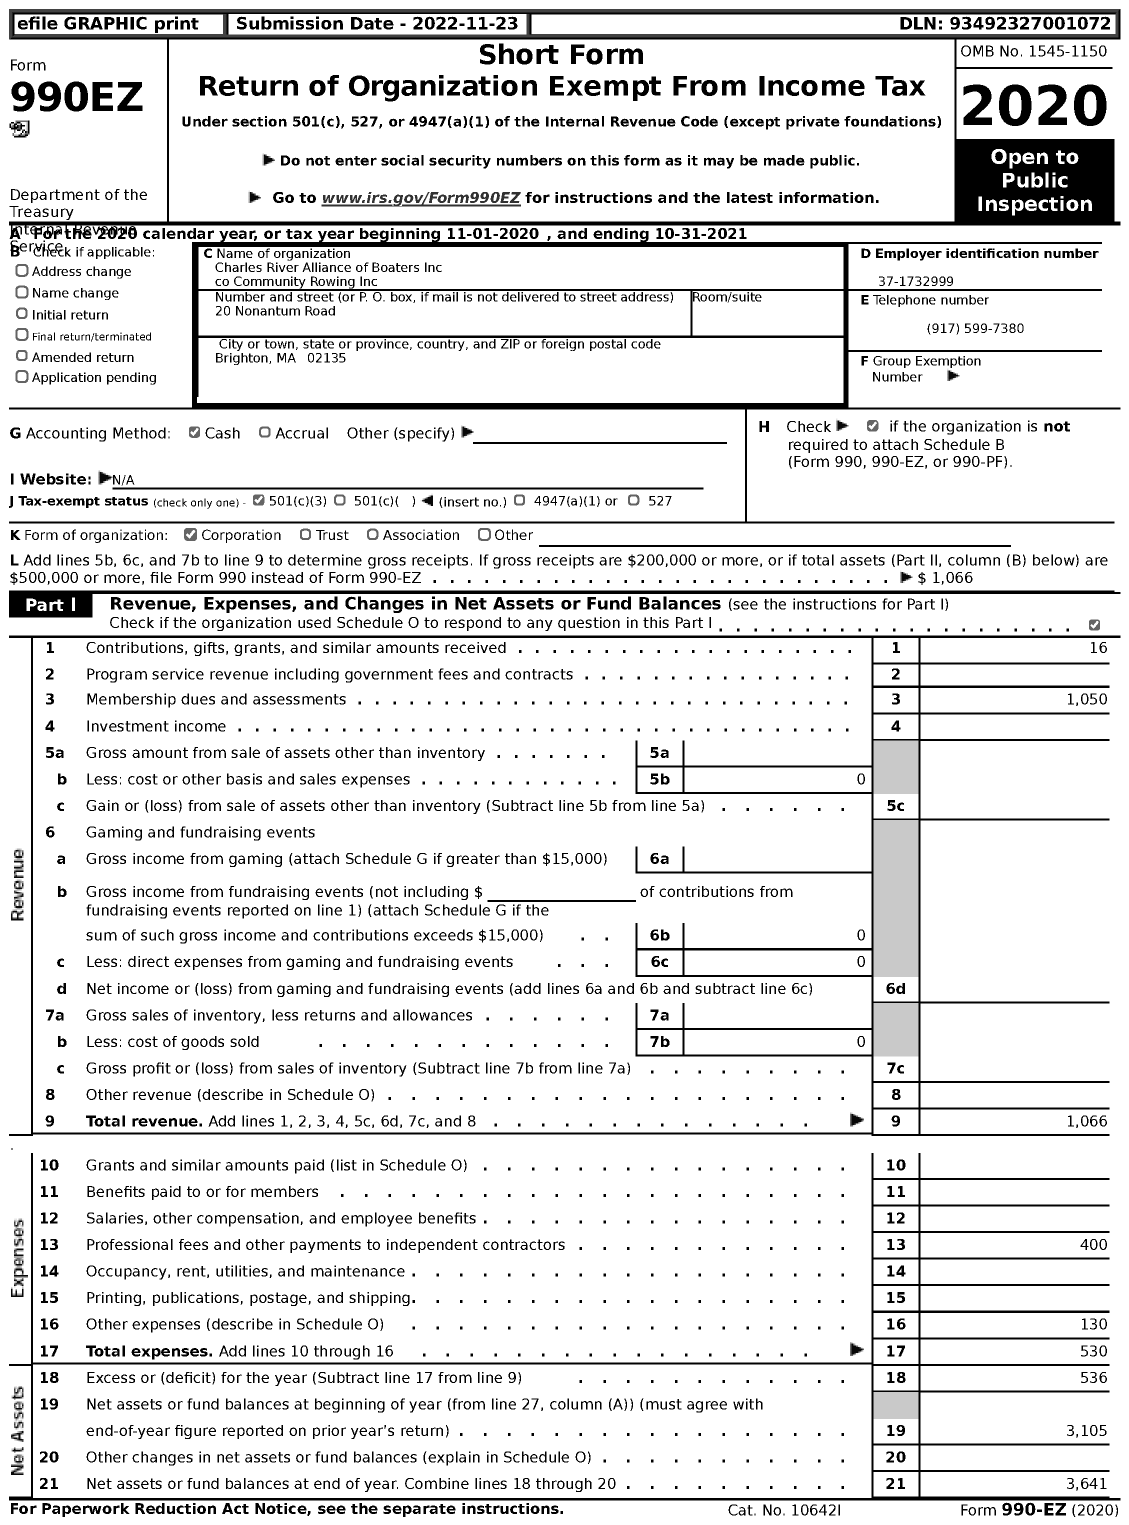 Image of first page of 2020 Form 990EZ for Charles River Alliance of Boaters